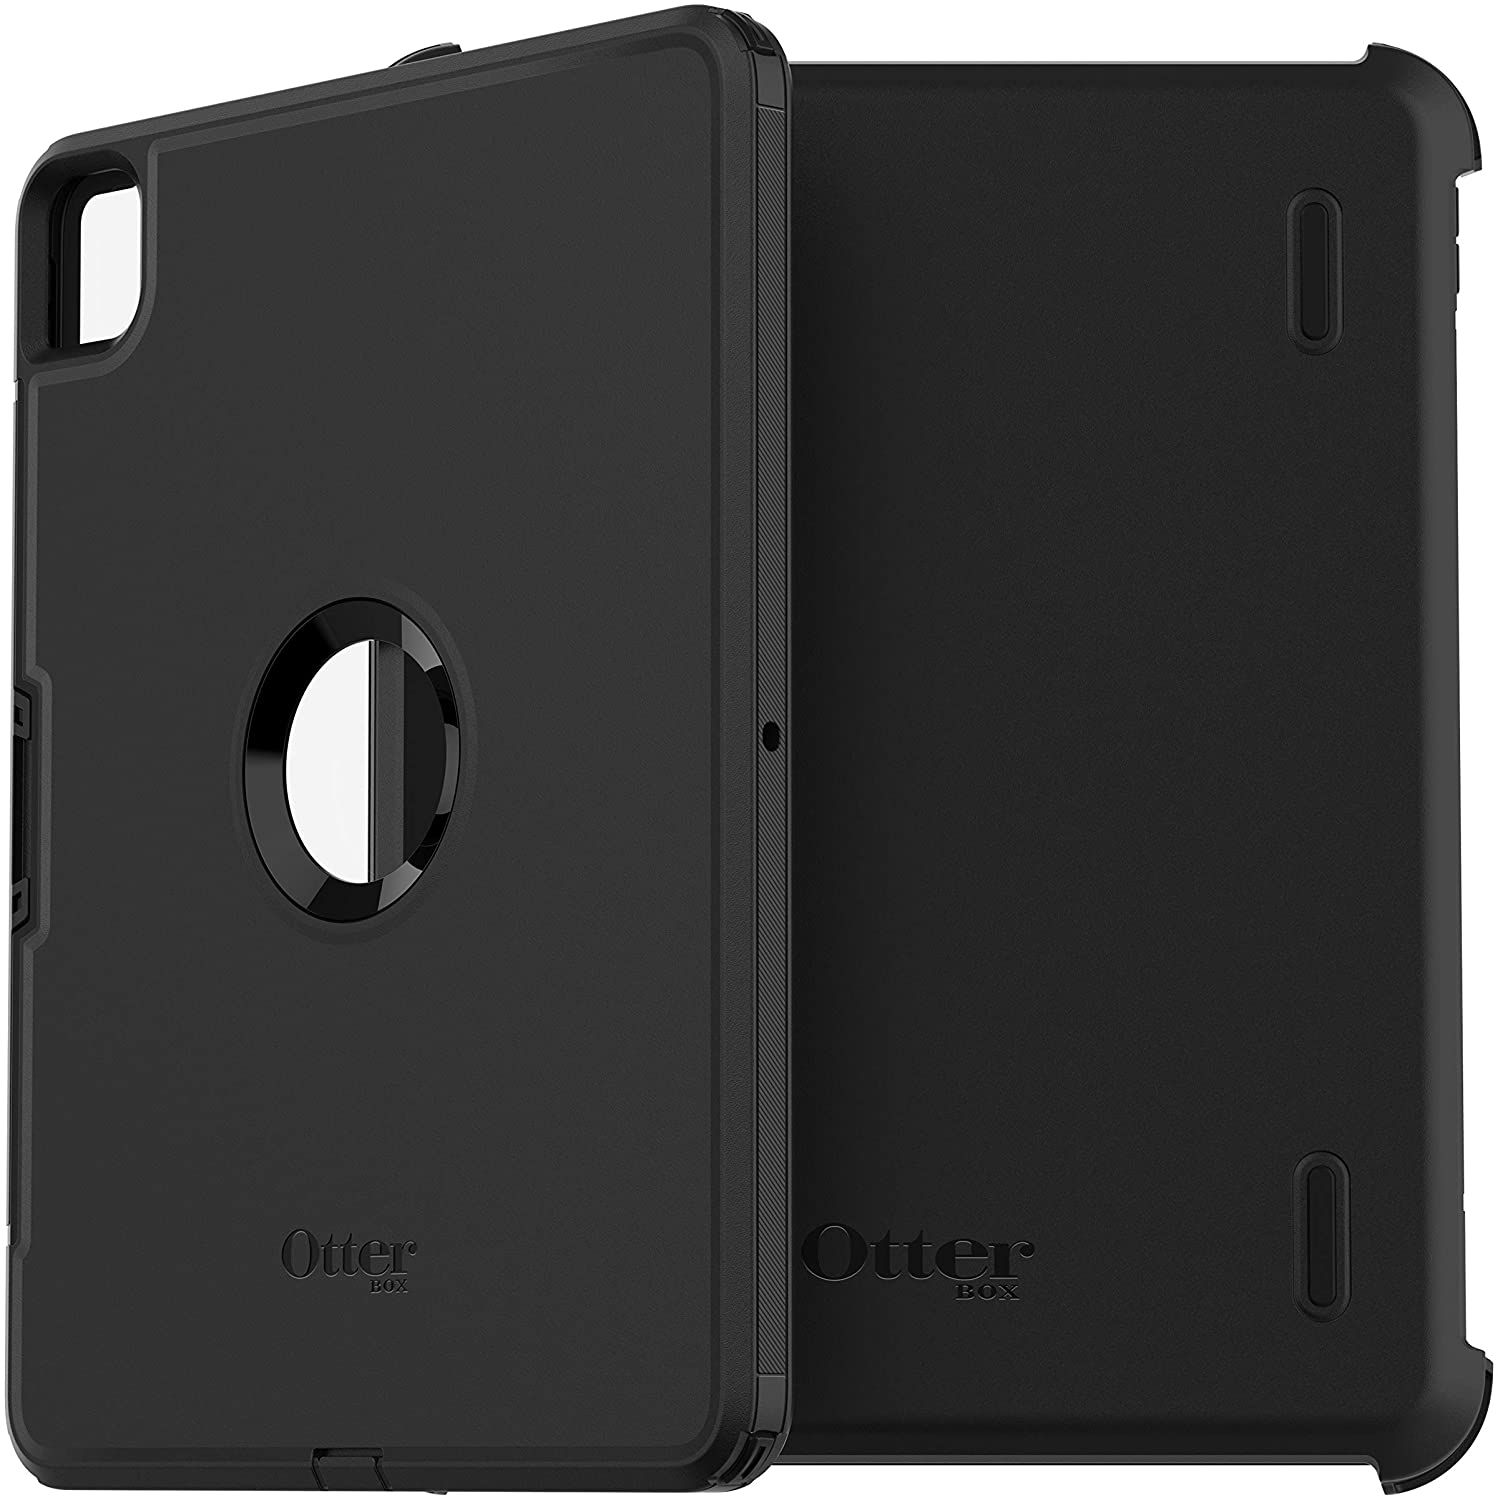 OtterBox Defender Series Case for IPAD PRO 12.9 1